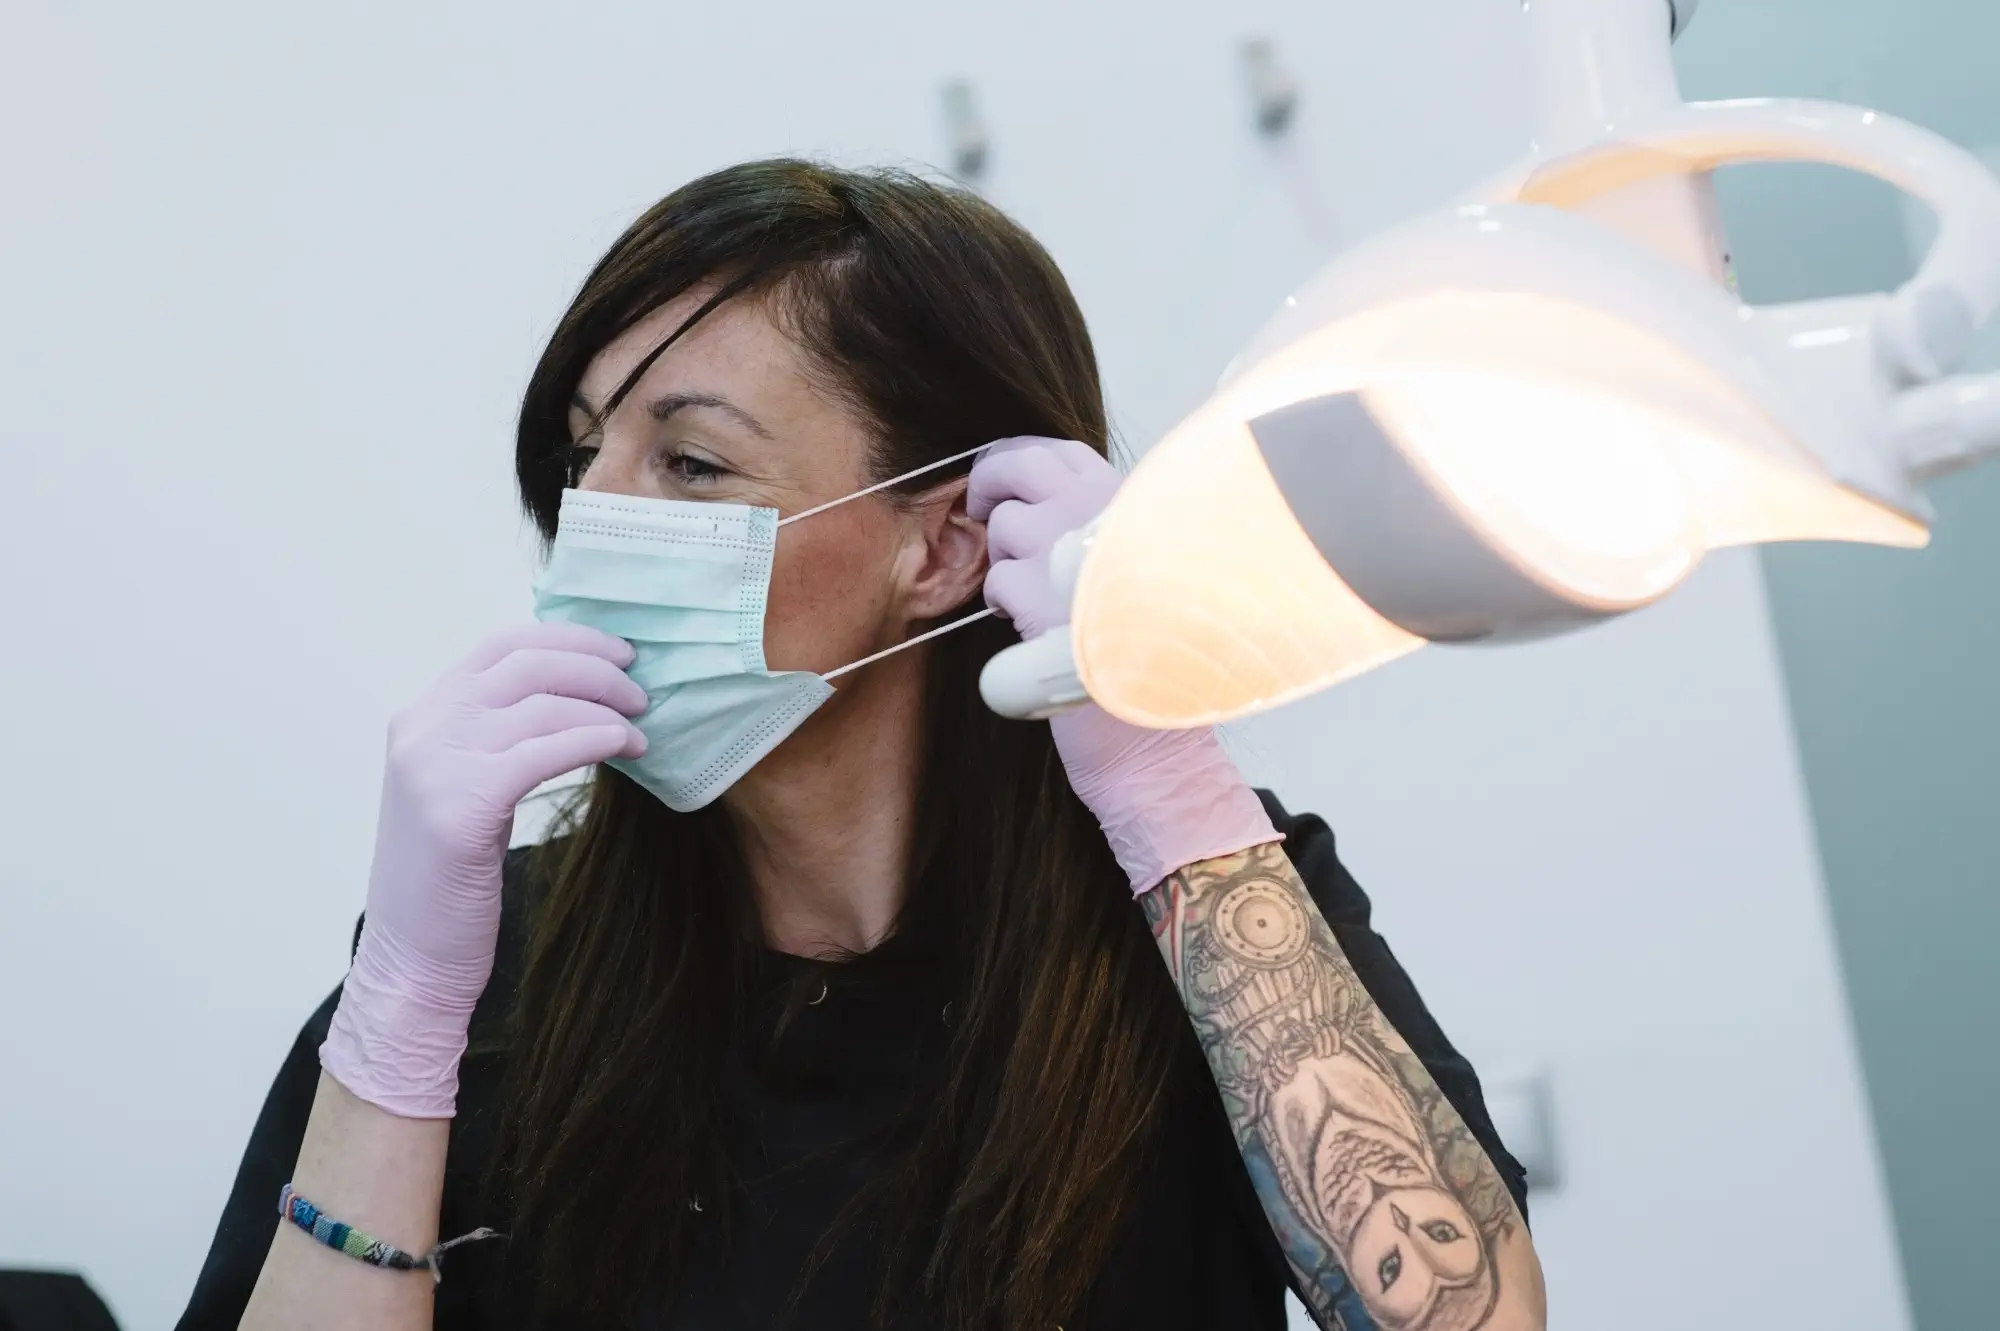 Are Piercings and Tattoos Acceptable in the Dental Workplace?